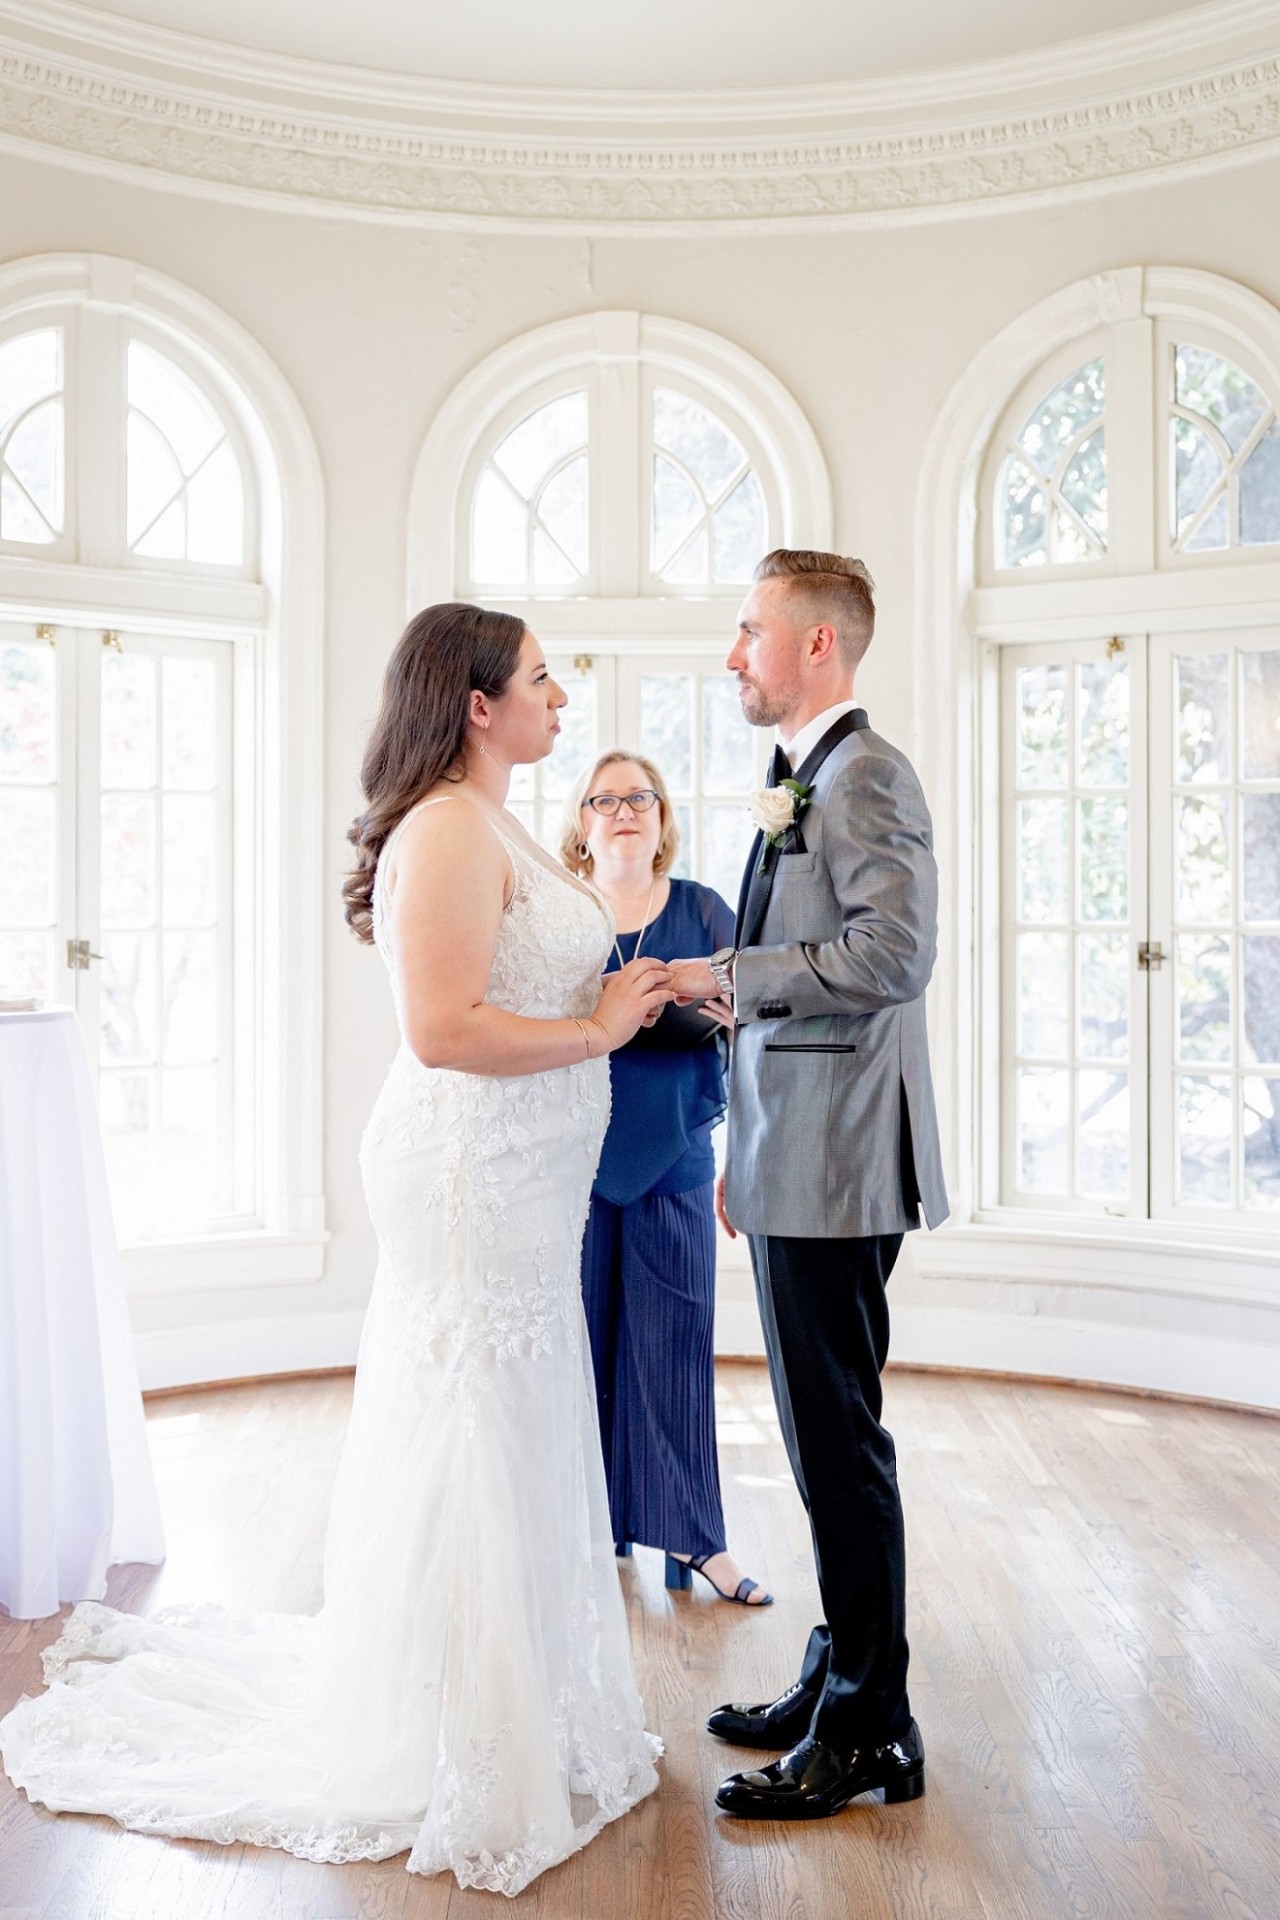 Marquee Officiant Services llc